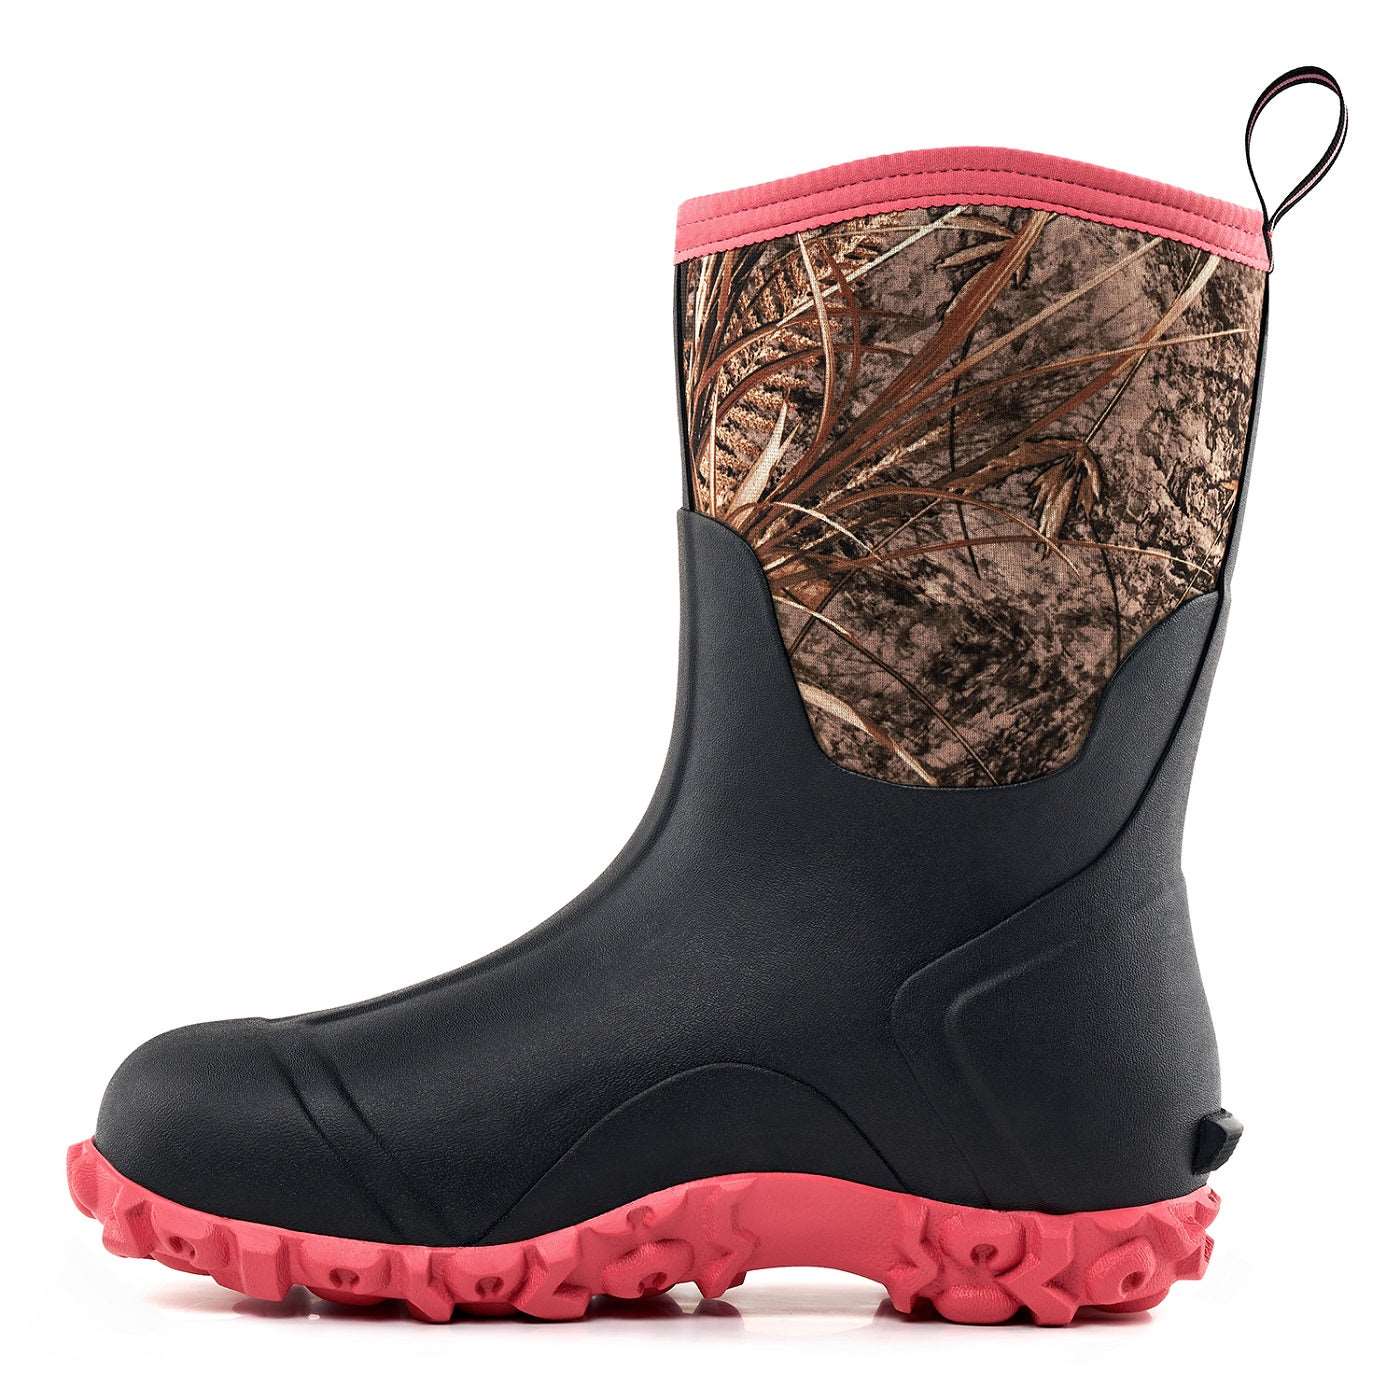 Trudave Pink Camo Rubber Rain Boots for Women